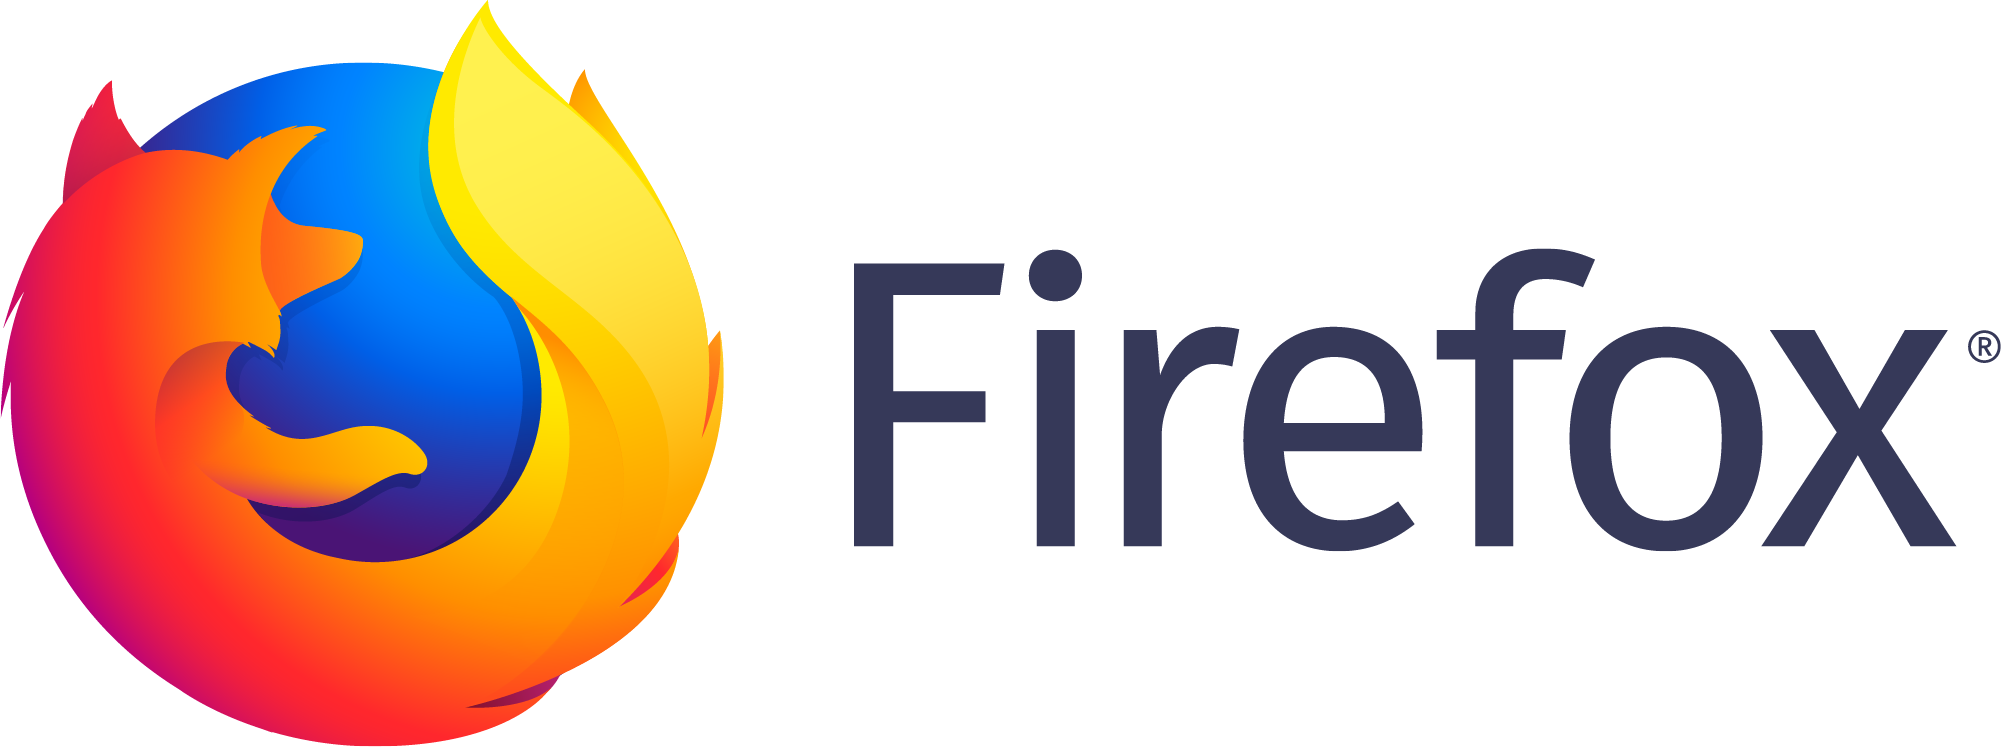 Available as a Firefox add-on